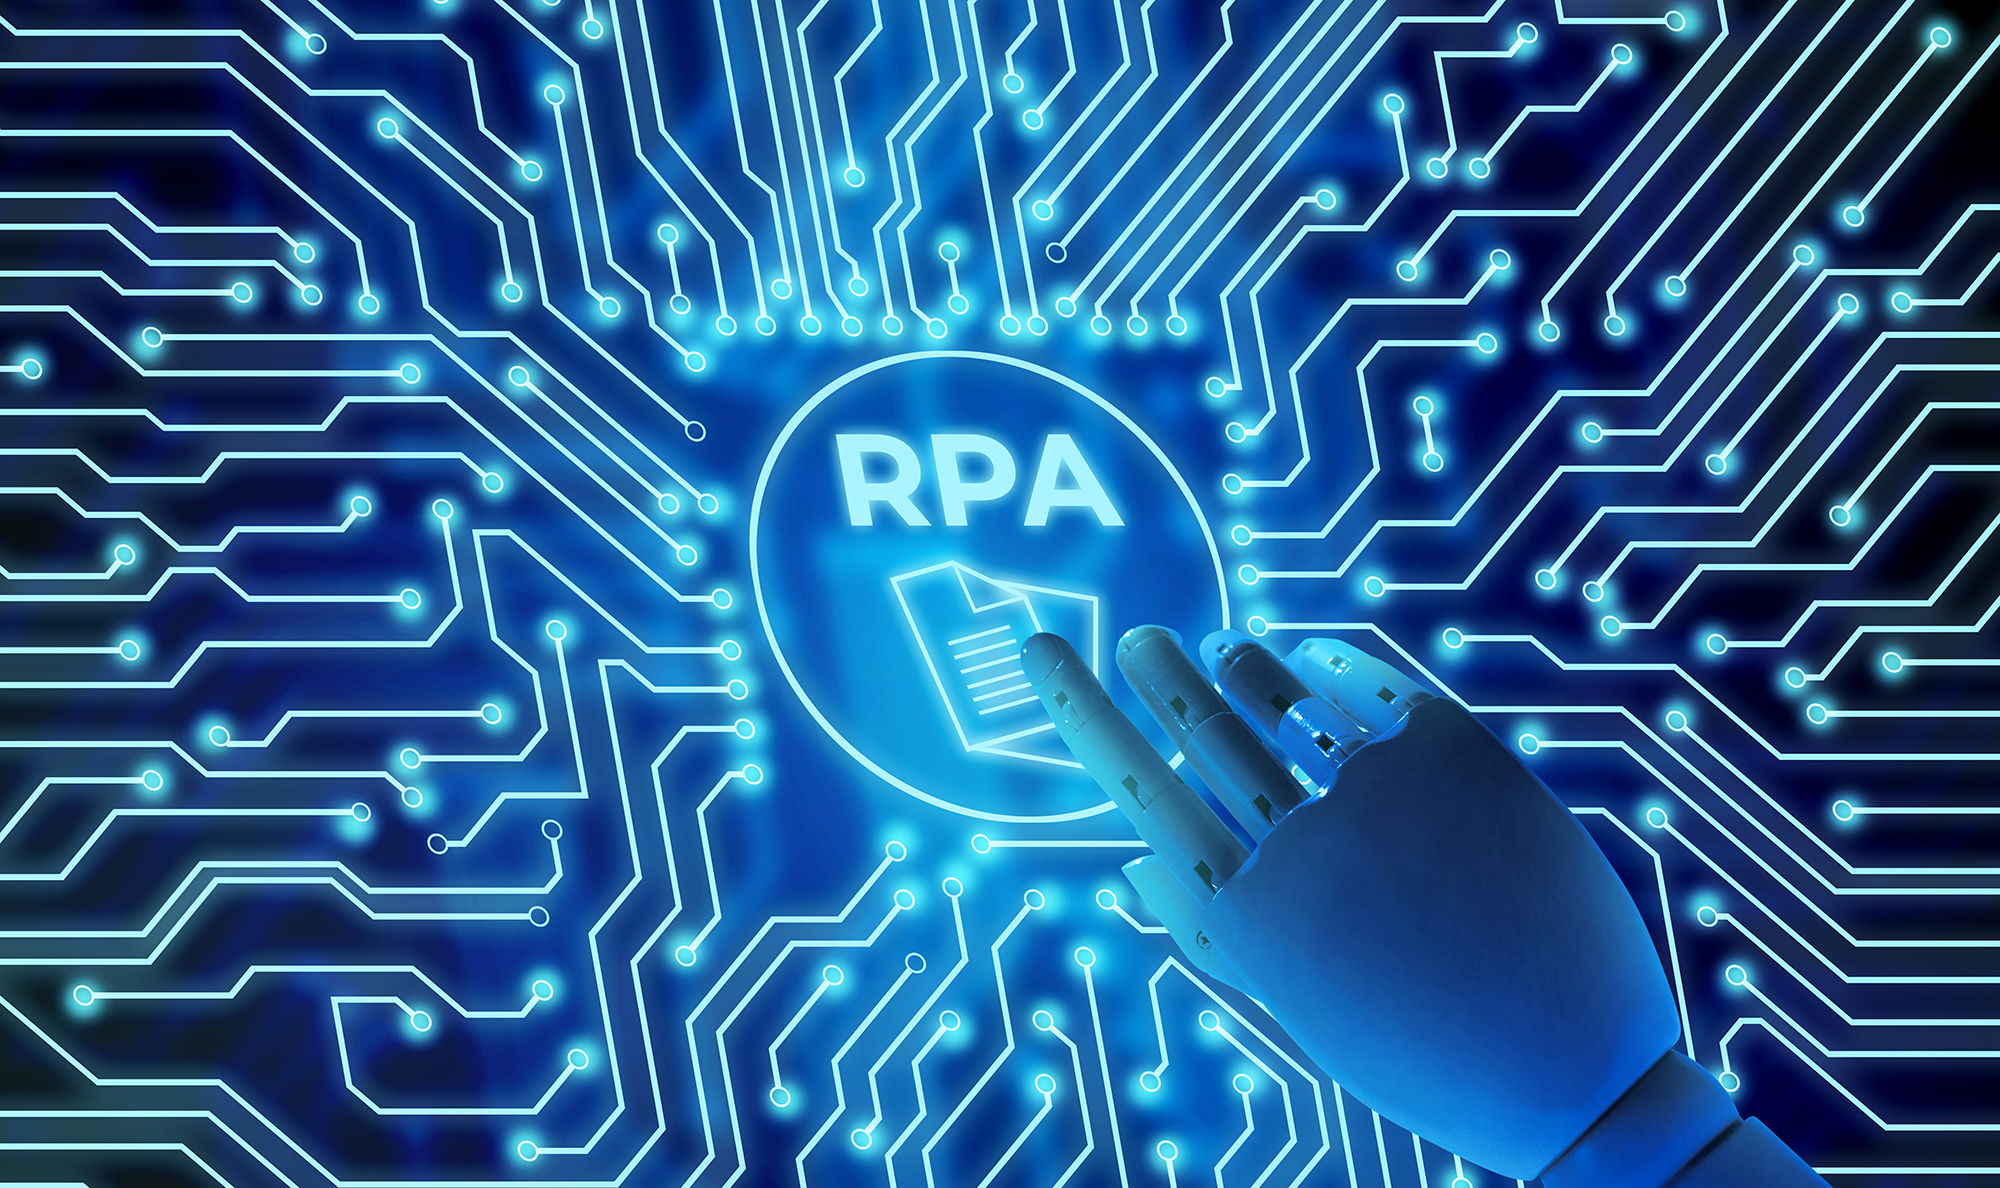 Blending RPA with Data Science